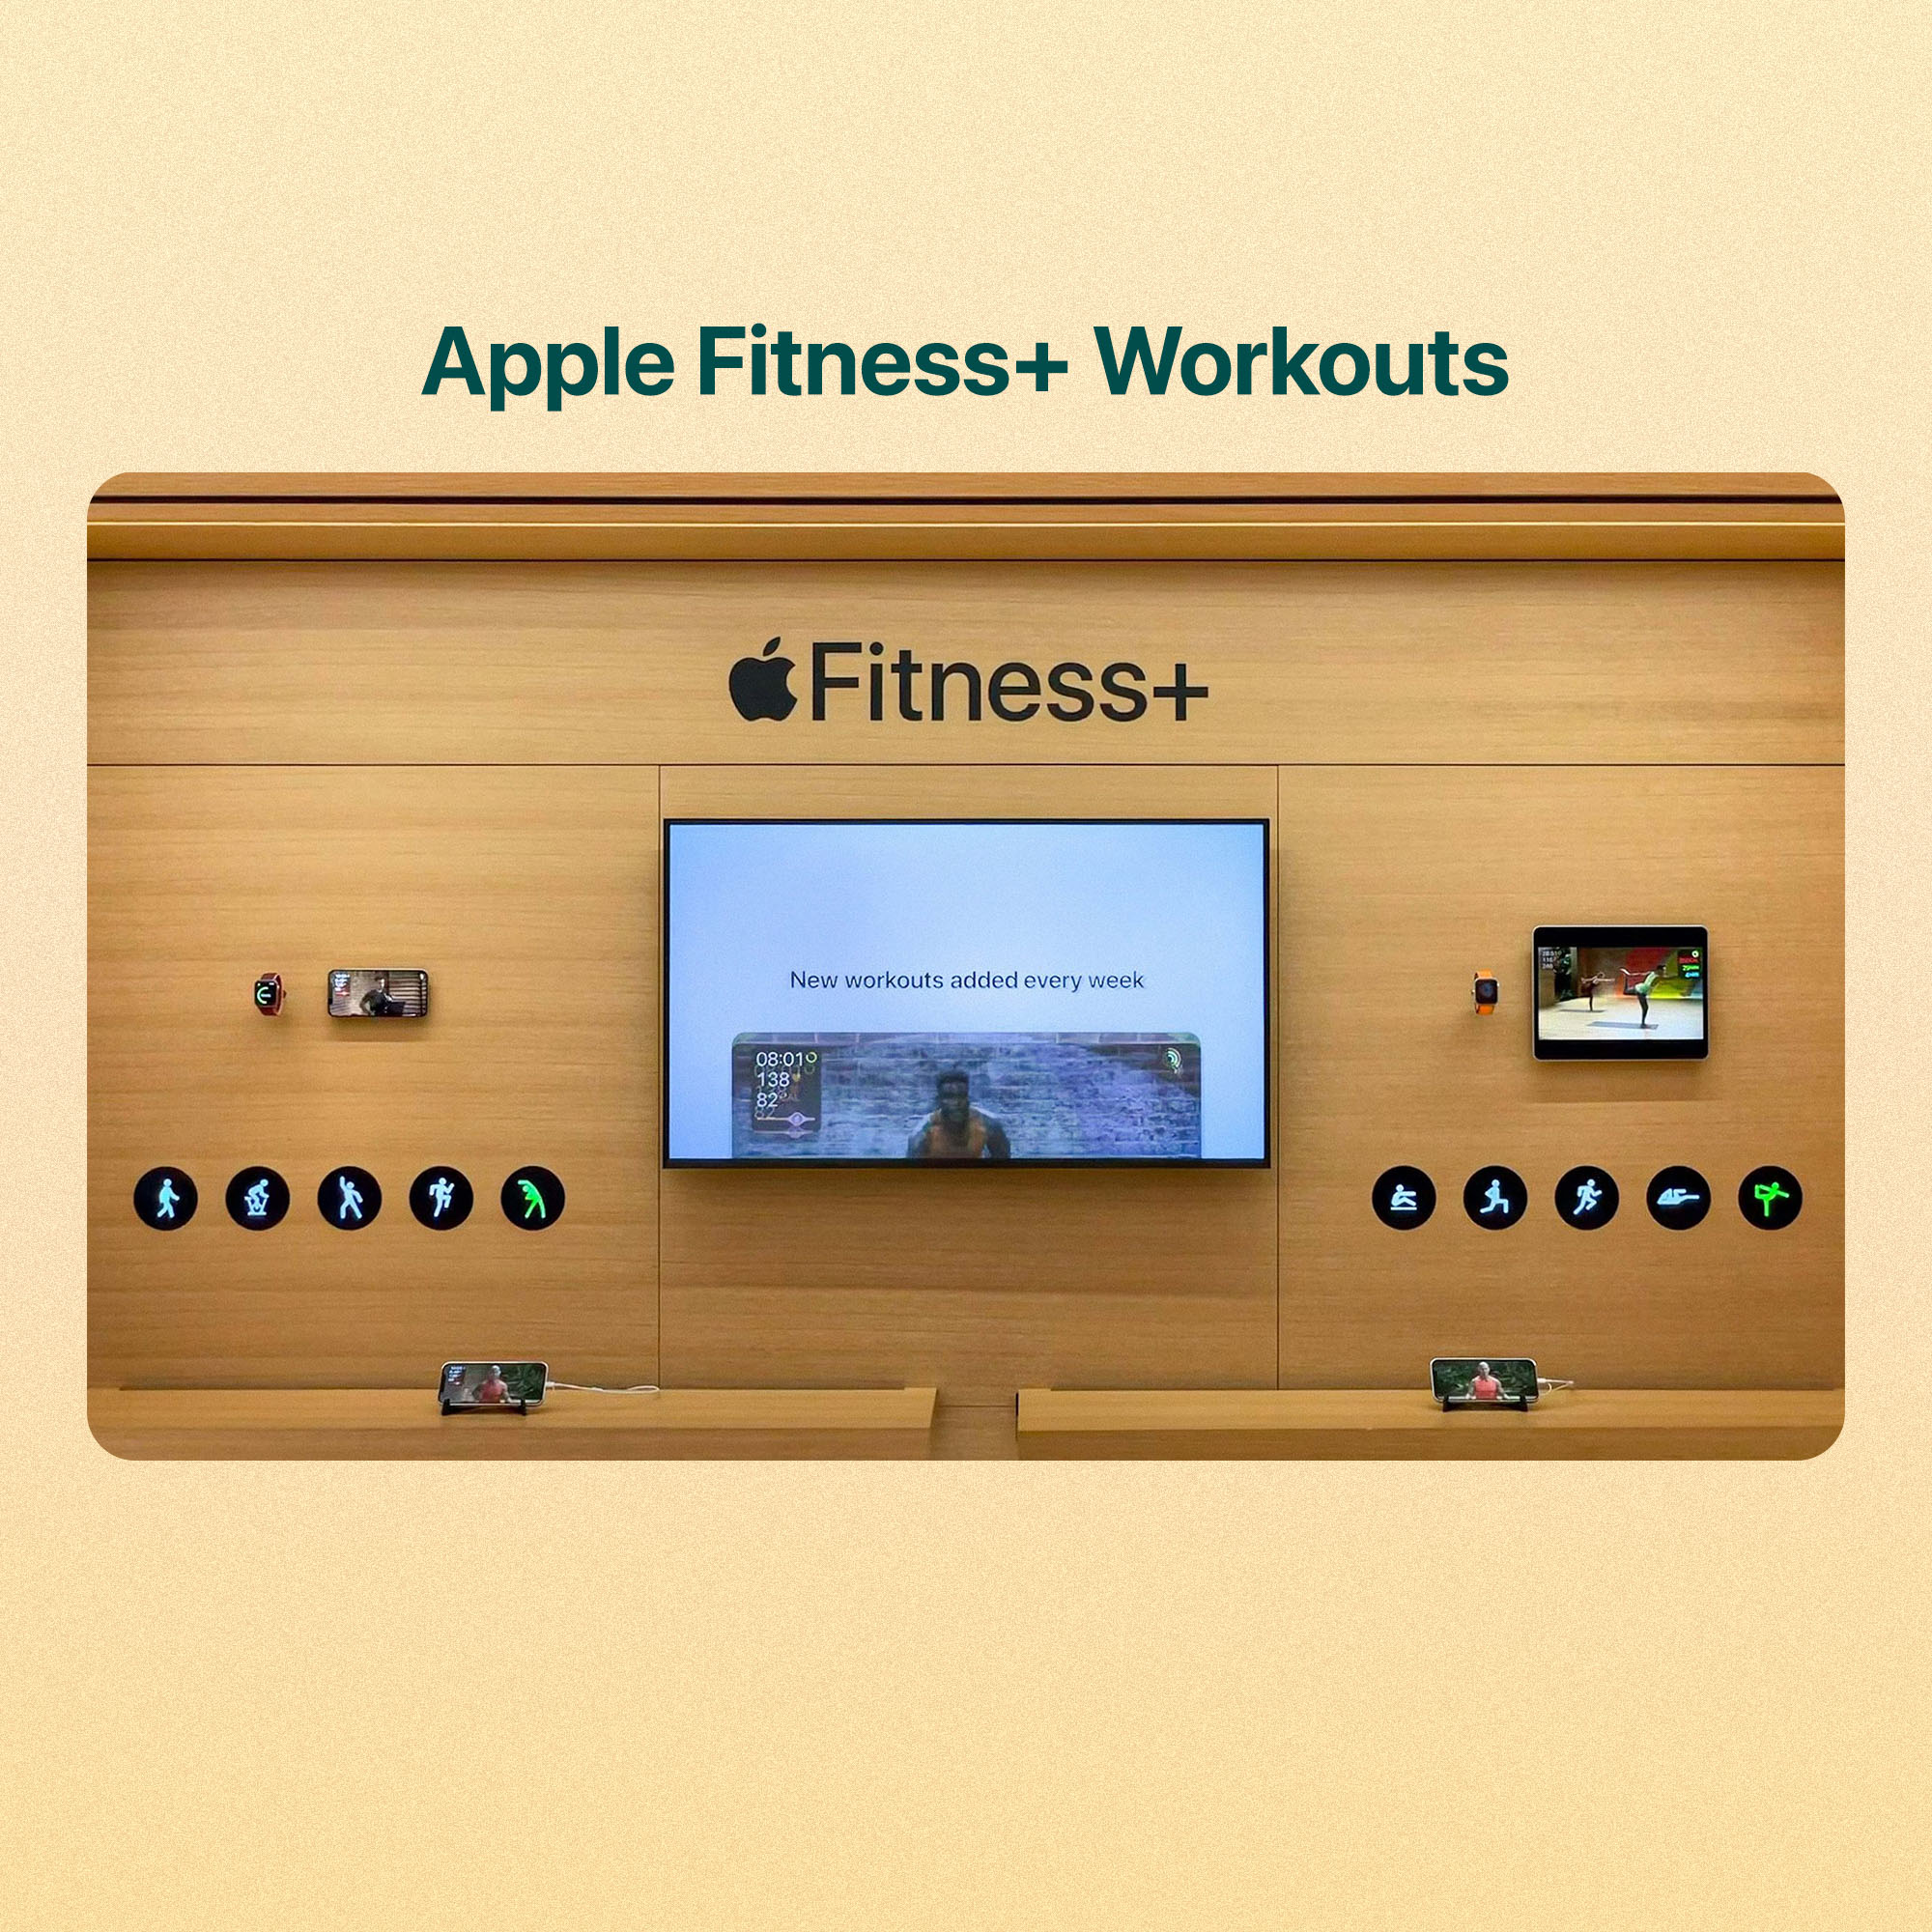 Apple Fitness+ Workouts Display